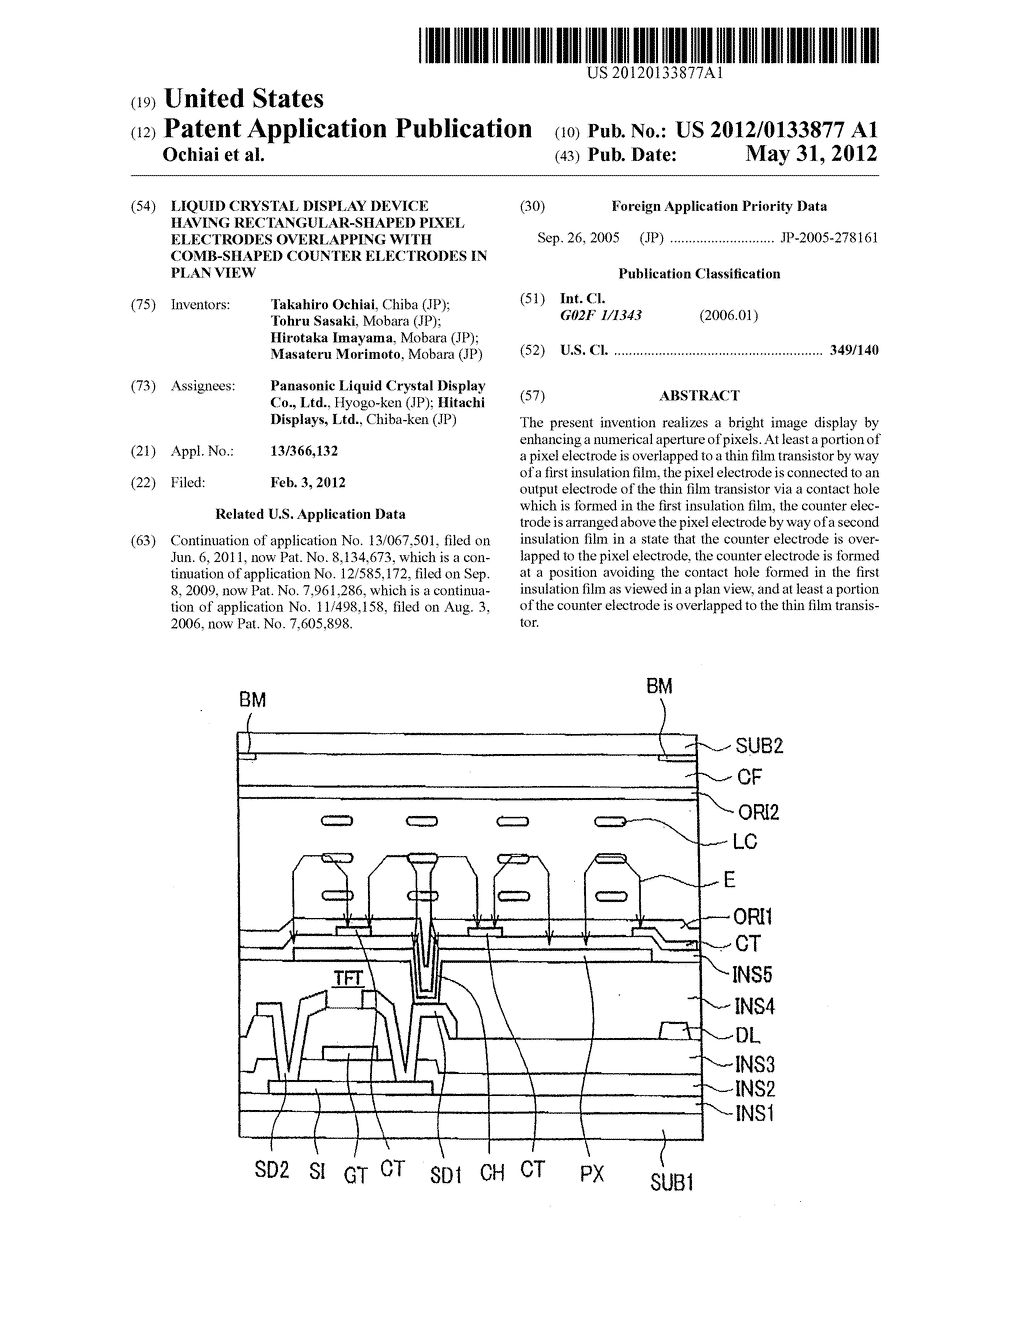 Liquid Crystal Display Device Having Rectangular-Shaped Pixel Electrodes     Overlapping with Comb-Shaped Counter Electrodes in Plan View - diagram, schematic, and image 01